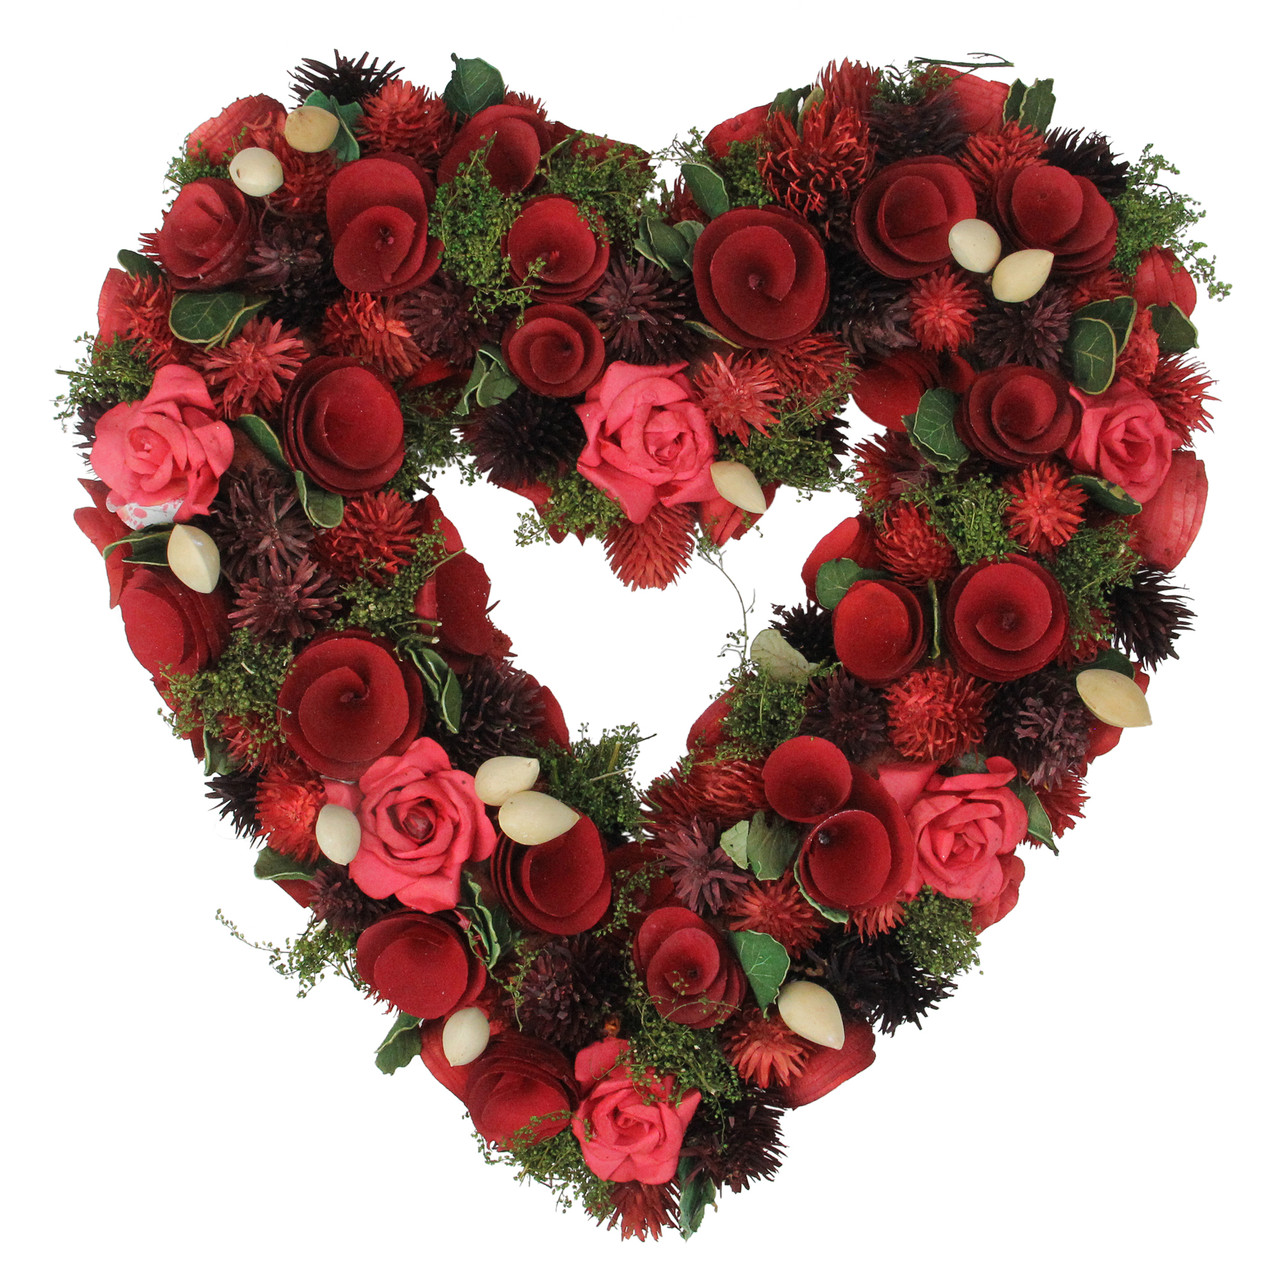 Heart Shaped Wreath Floral Rose Artificial Garland Door Wreath for Home  Wedding Valentine's Day Decoration, Red Pink, 14 inches